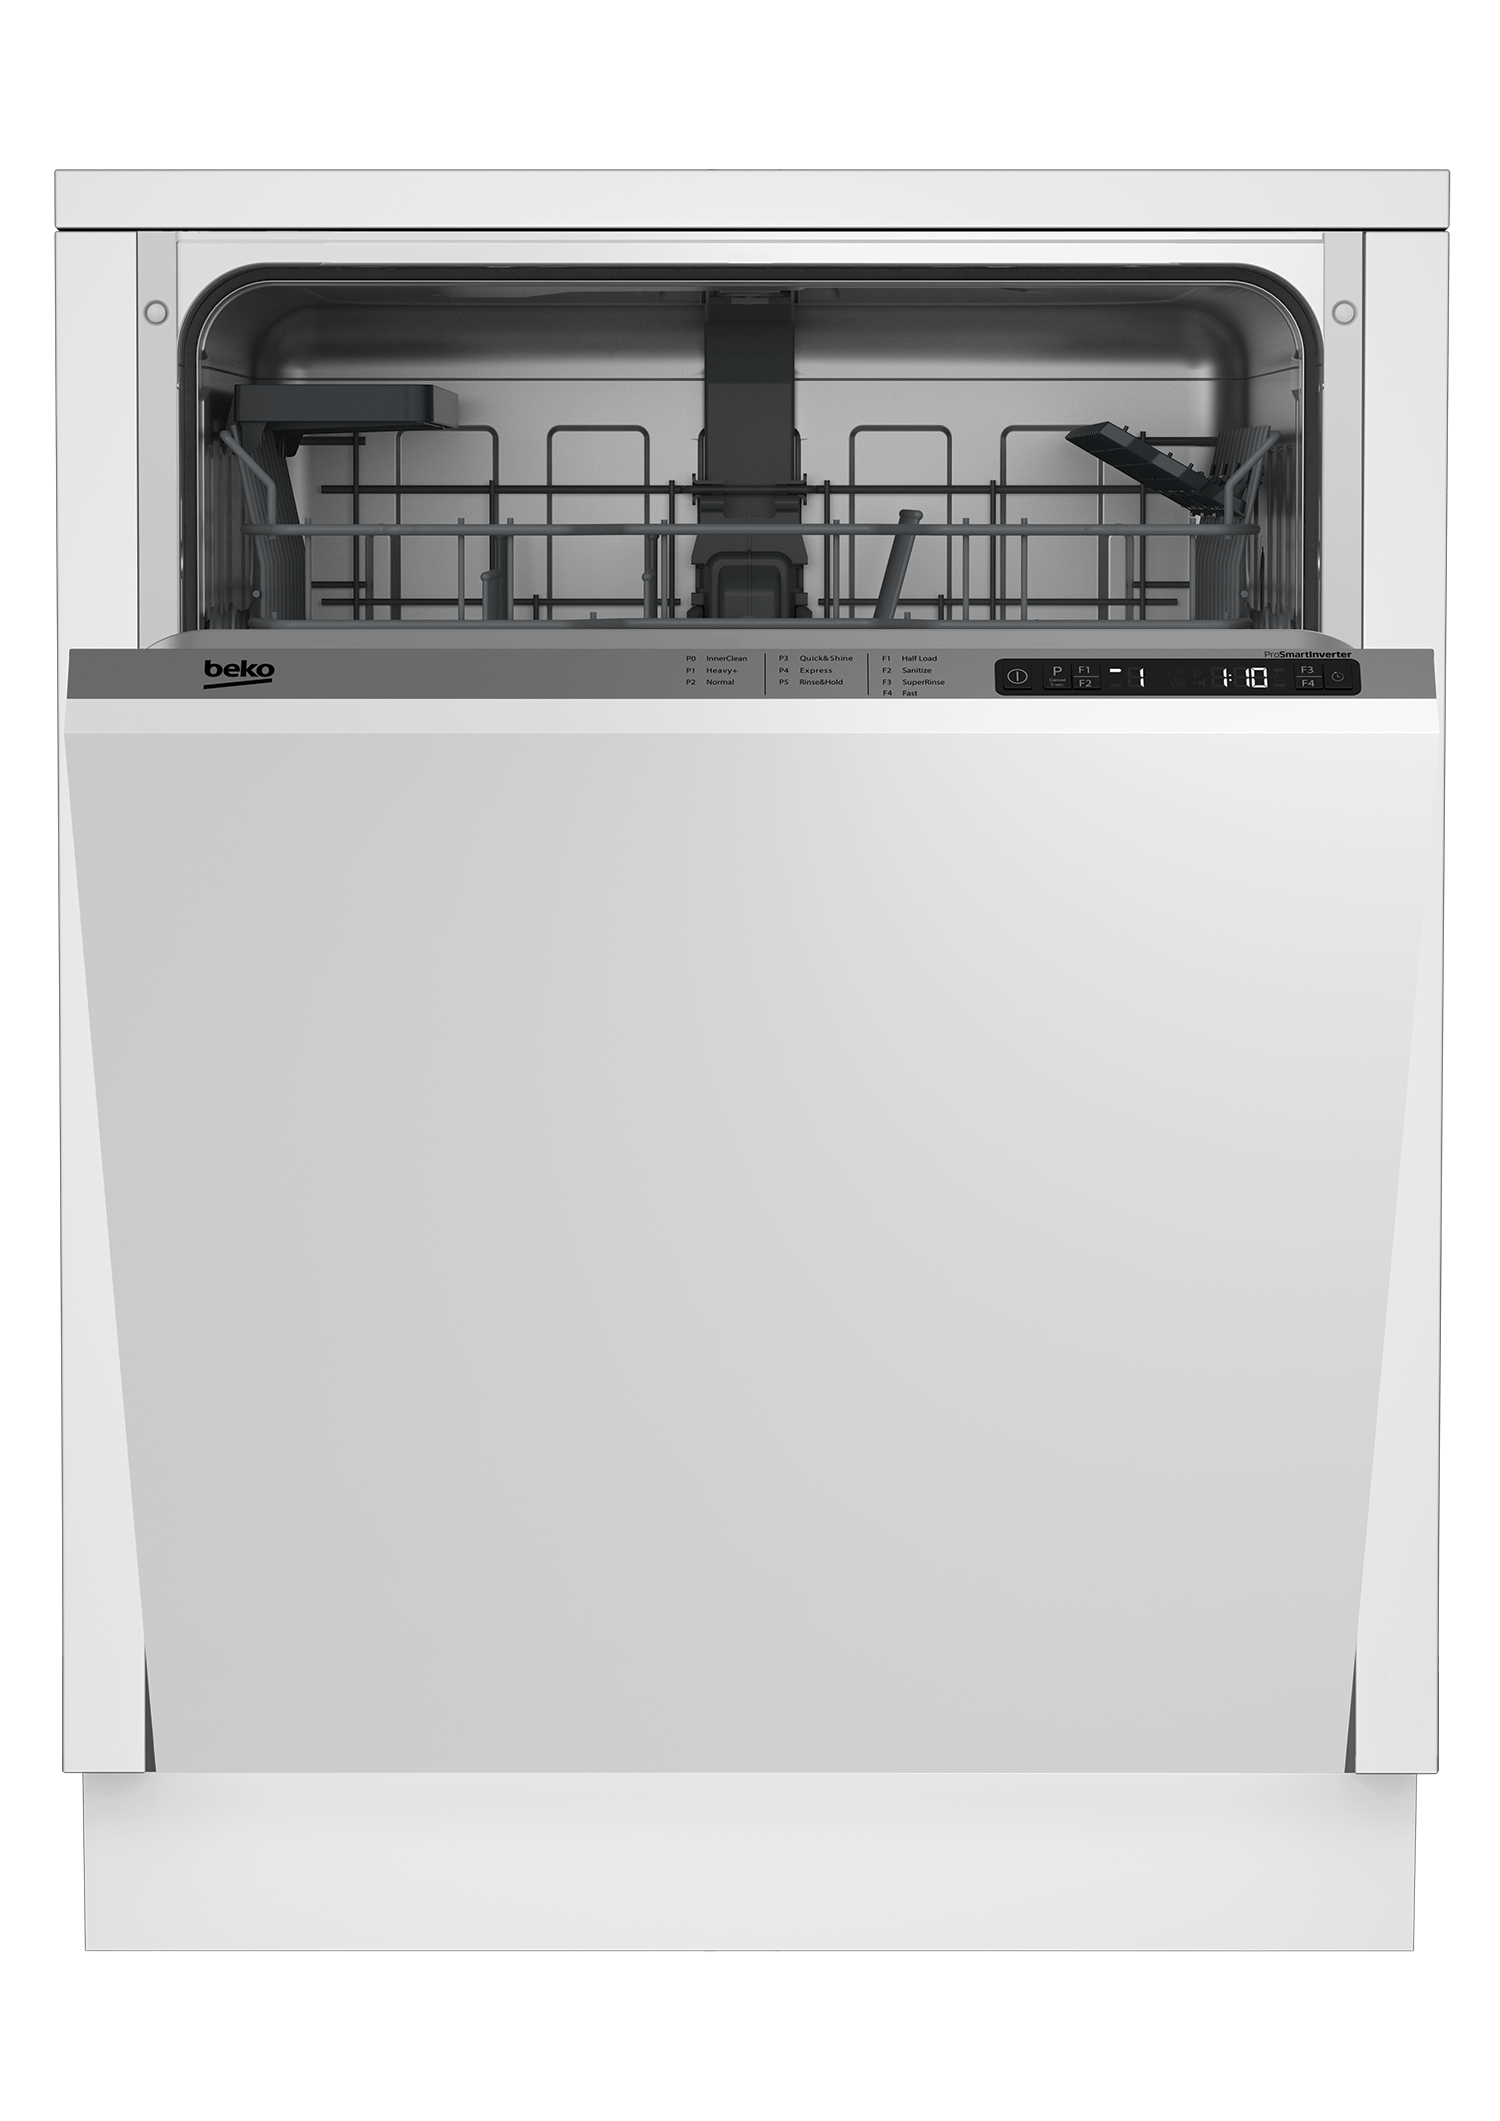 Beko Tall Tub Dishwasher, 14 place settings, 48 dBa, Fully Integrated Panel Ready